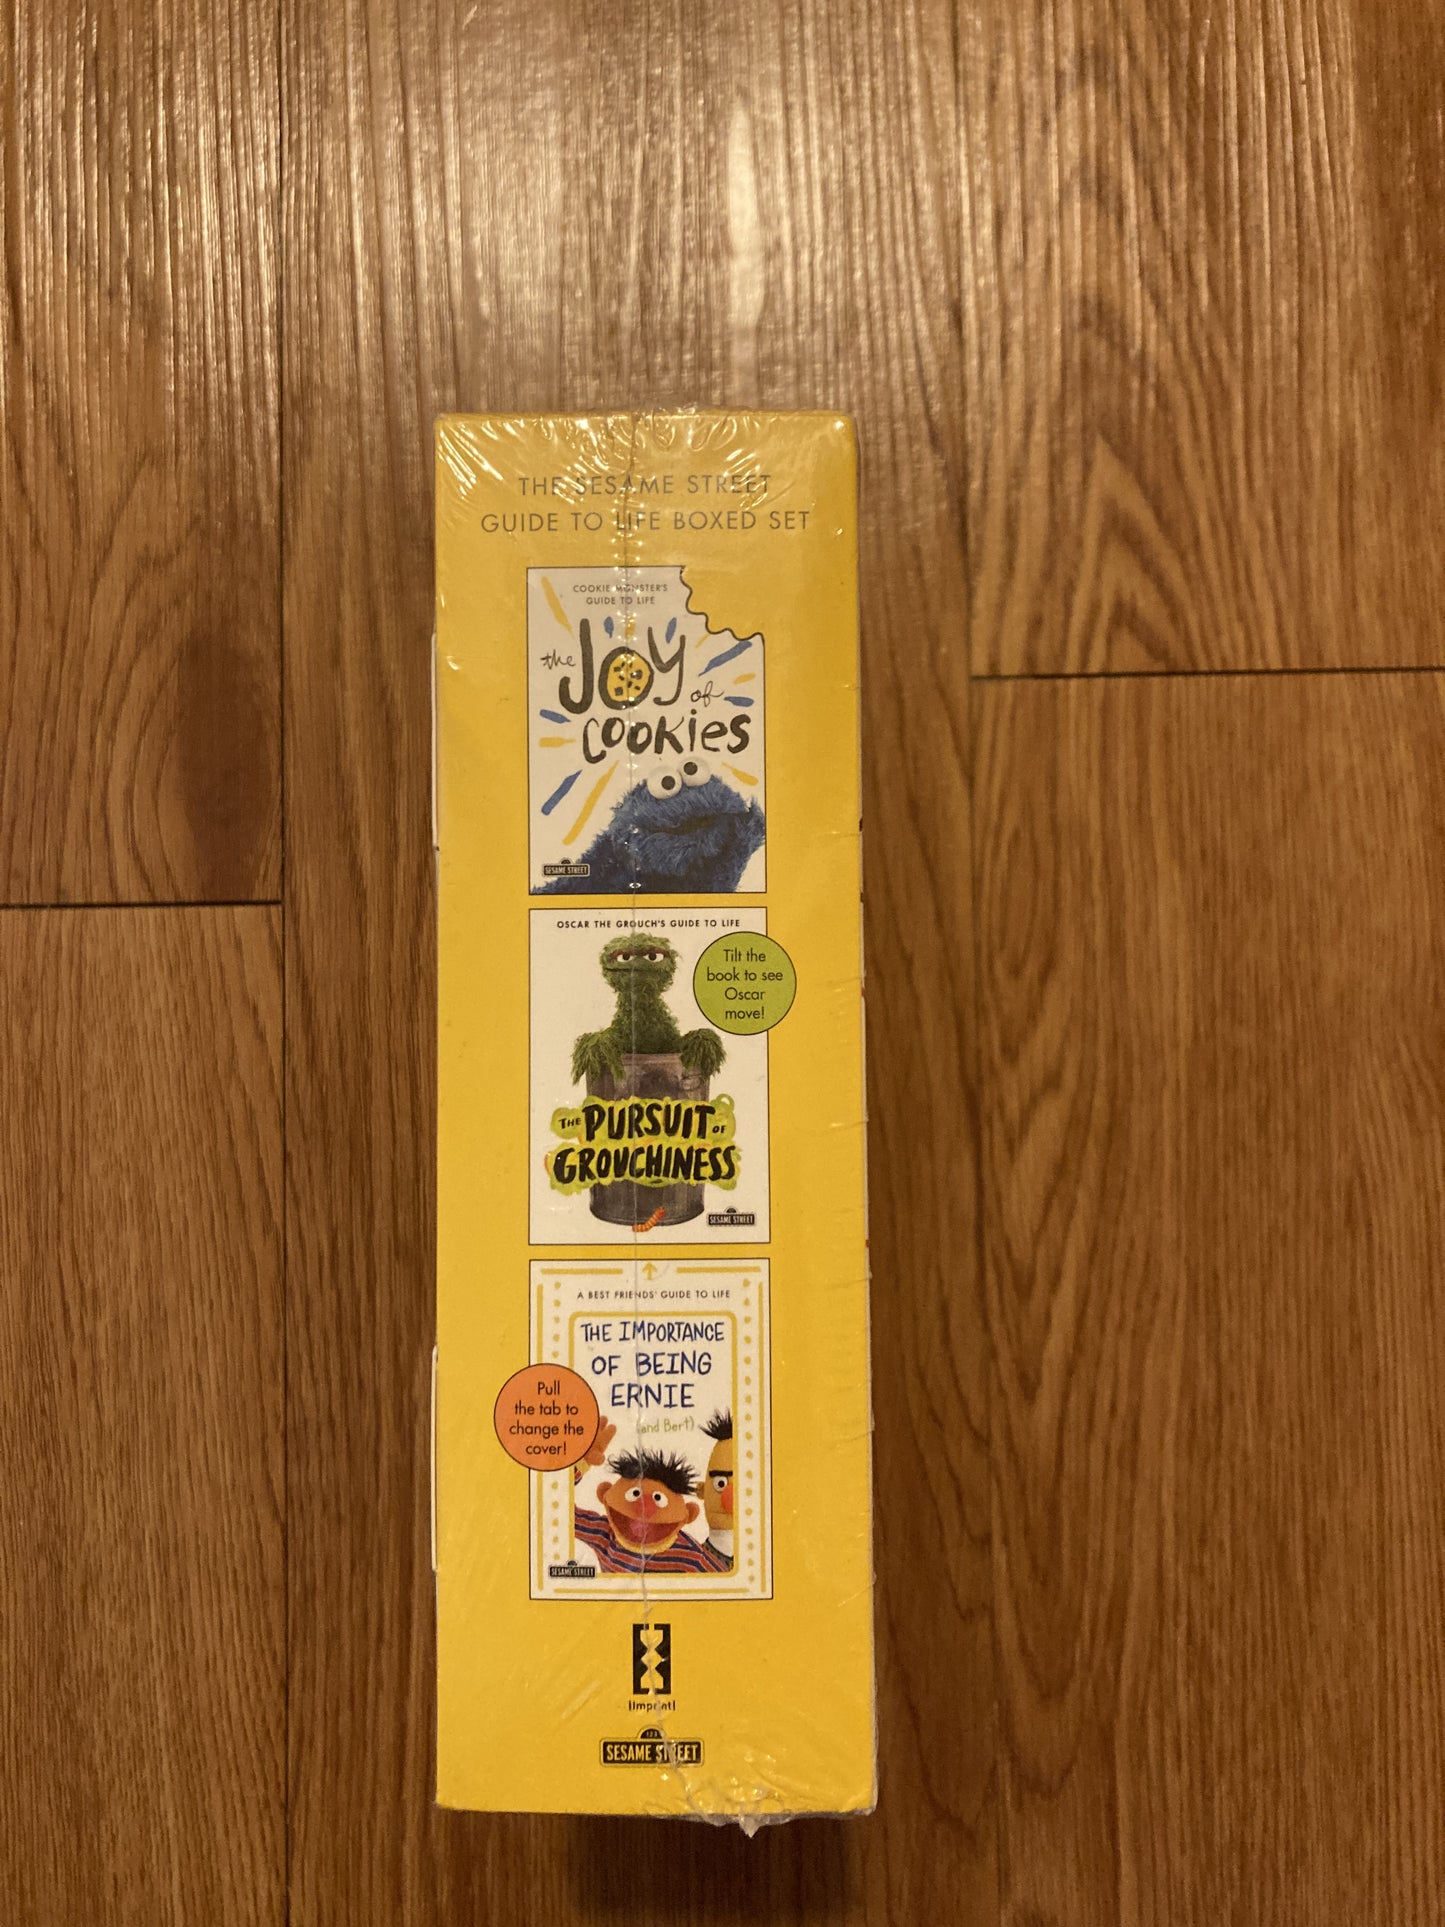 The Sesame Street Guide to Life Boxed Set